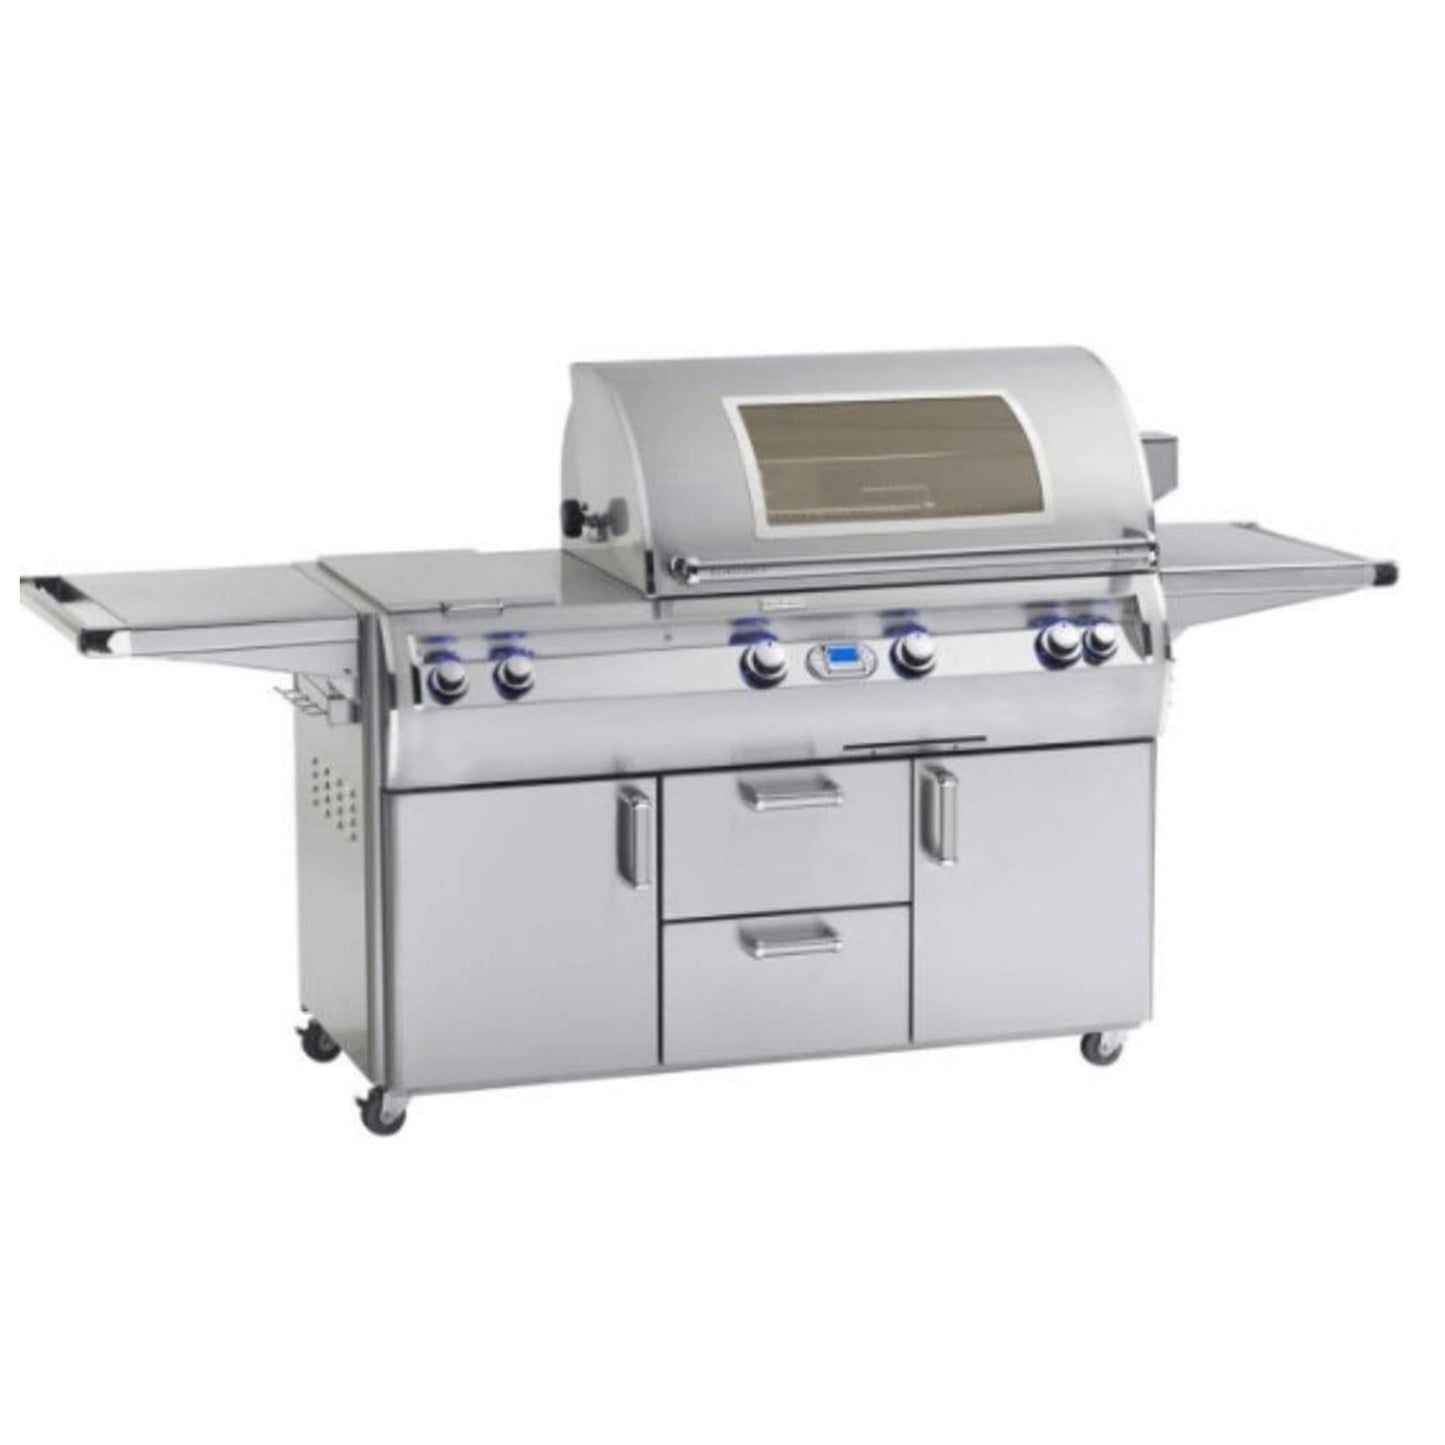 Fire Magic 36-Inch E790s Portable Grills with Digital Thermometer & Double Side Burner